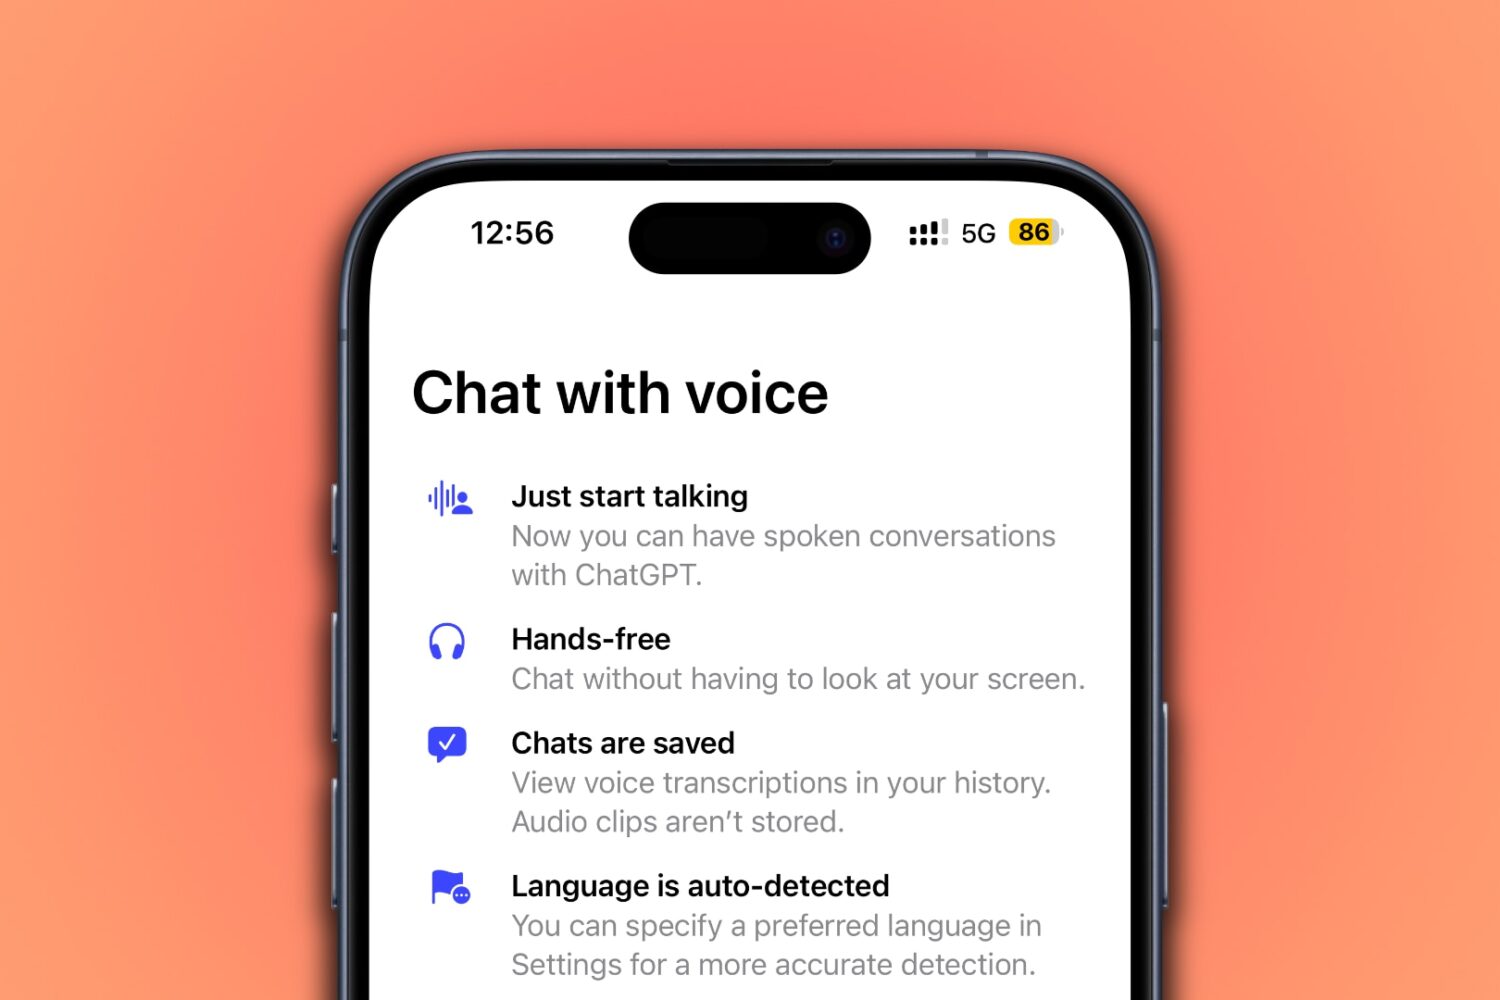 Splash screen for voice features in the ChatGPT iPhone app